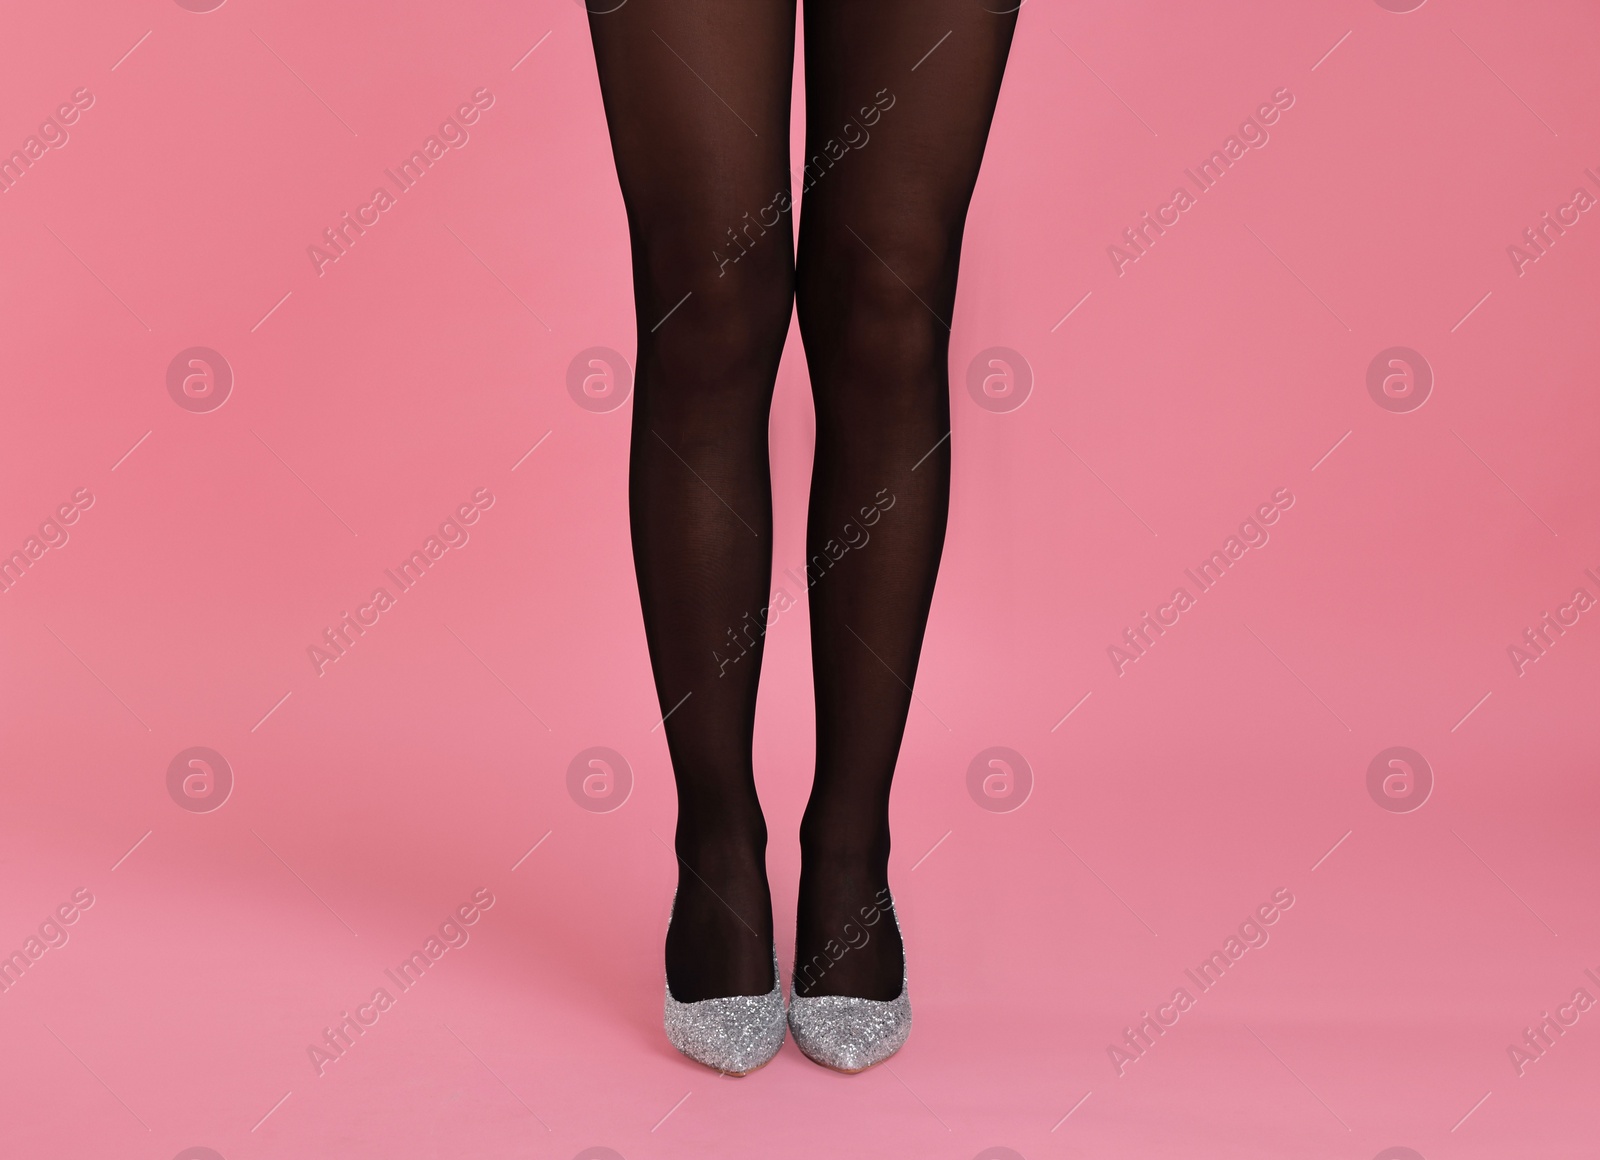 Photo of Woman with beautiful long legs wearing black tights and stylish shoes on pink background, closeup